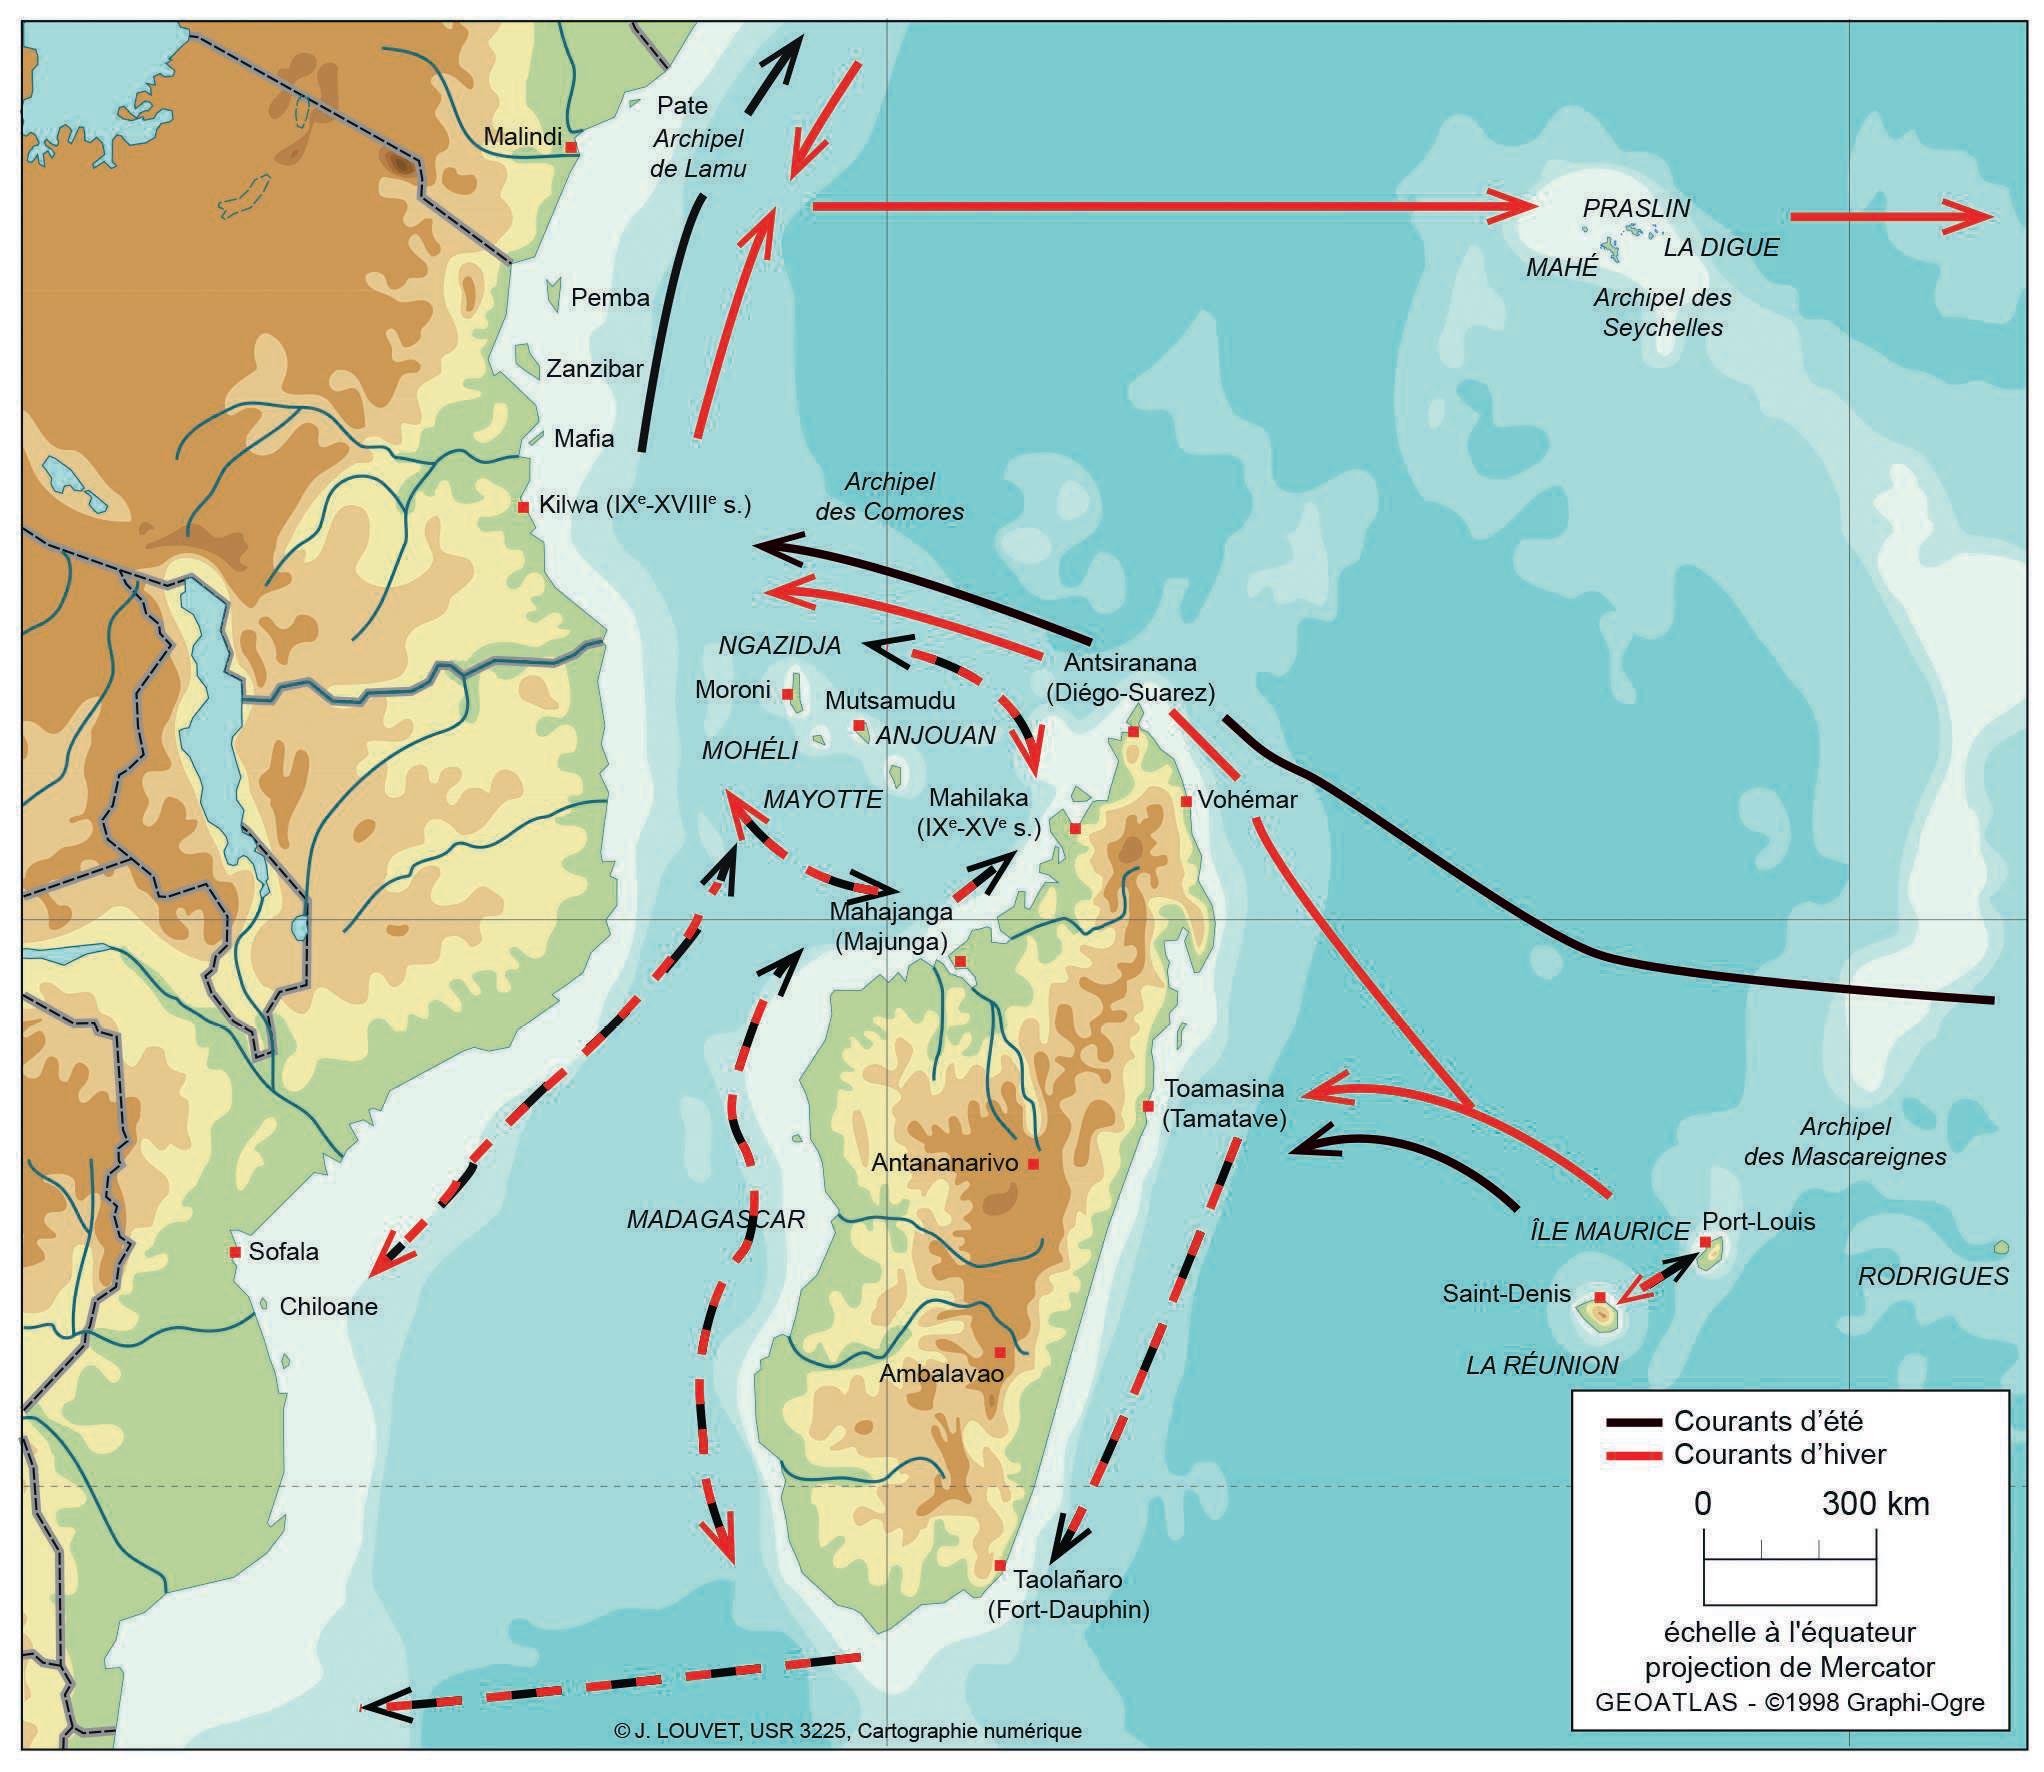 map of the western indian ocean